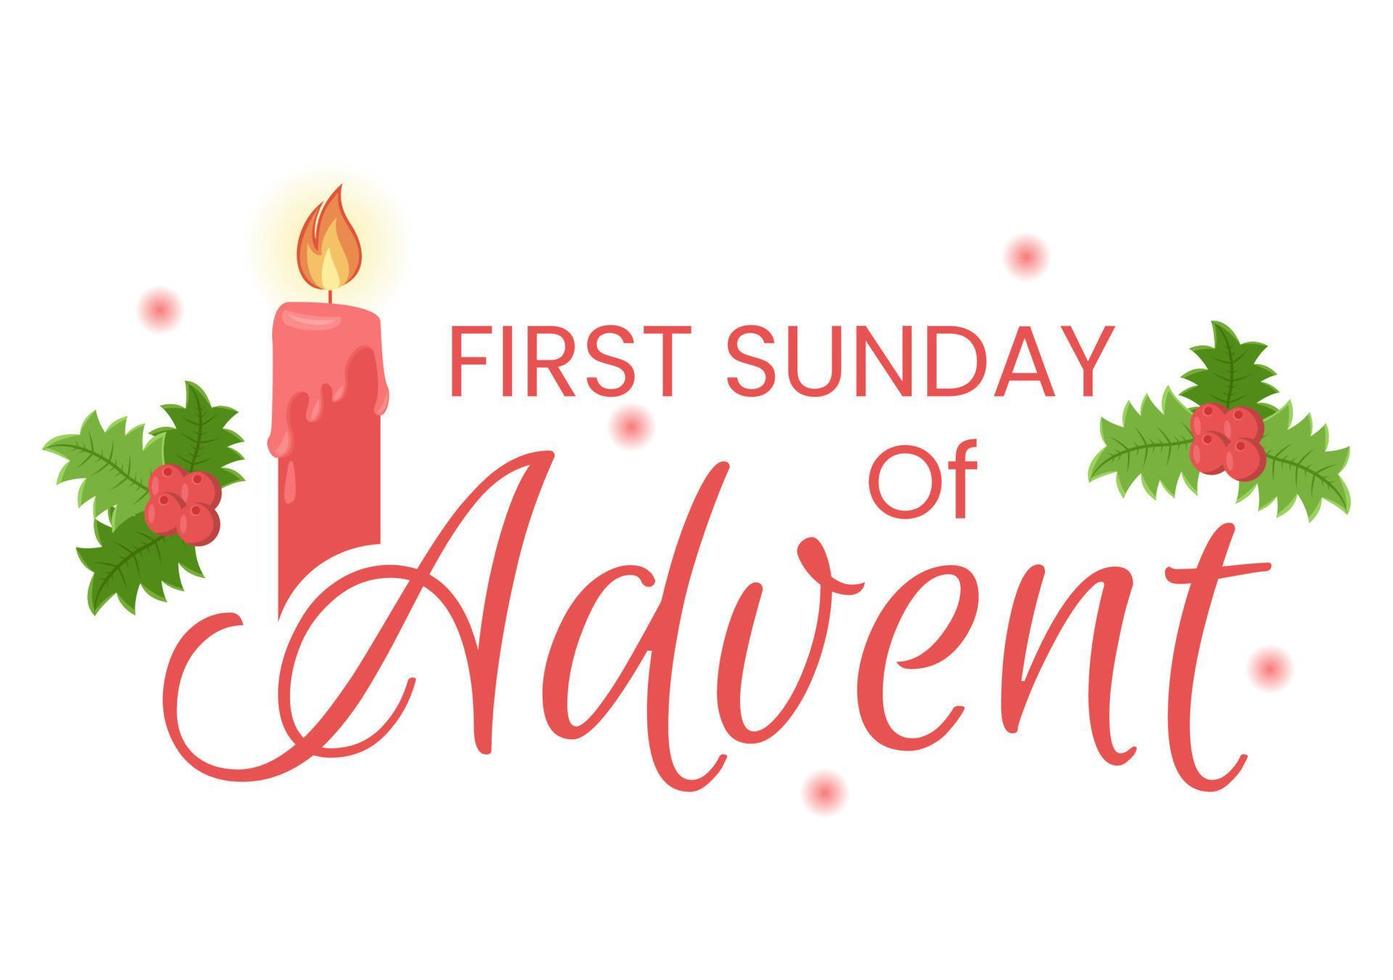 First Sunday of Advent or the Beginning of a New Church Year Which